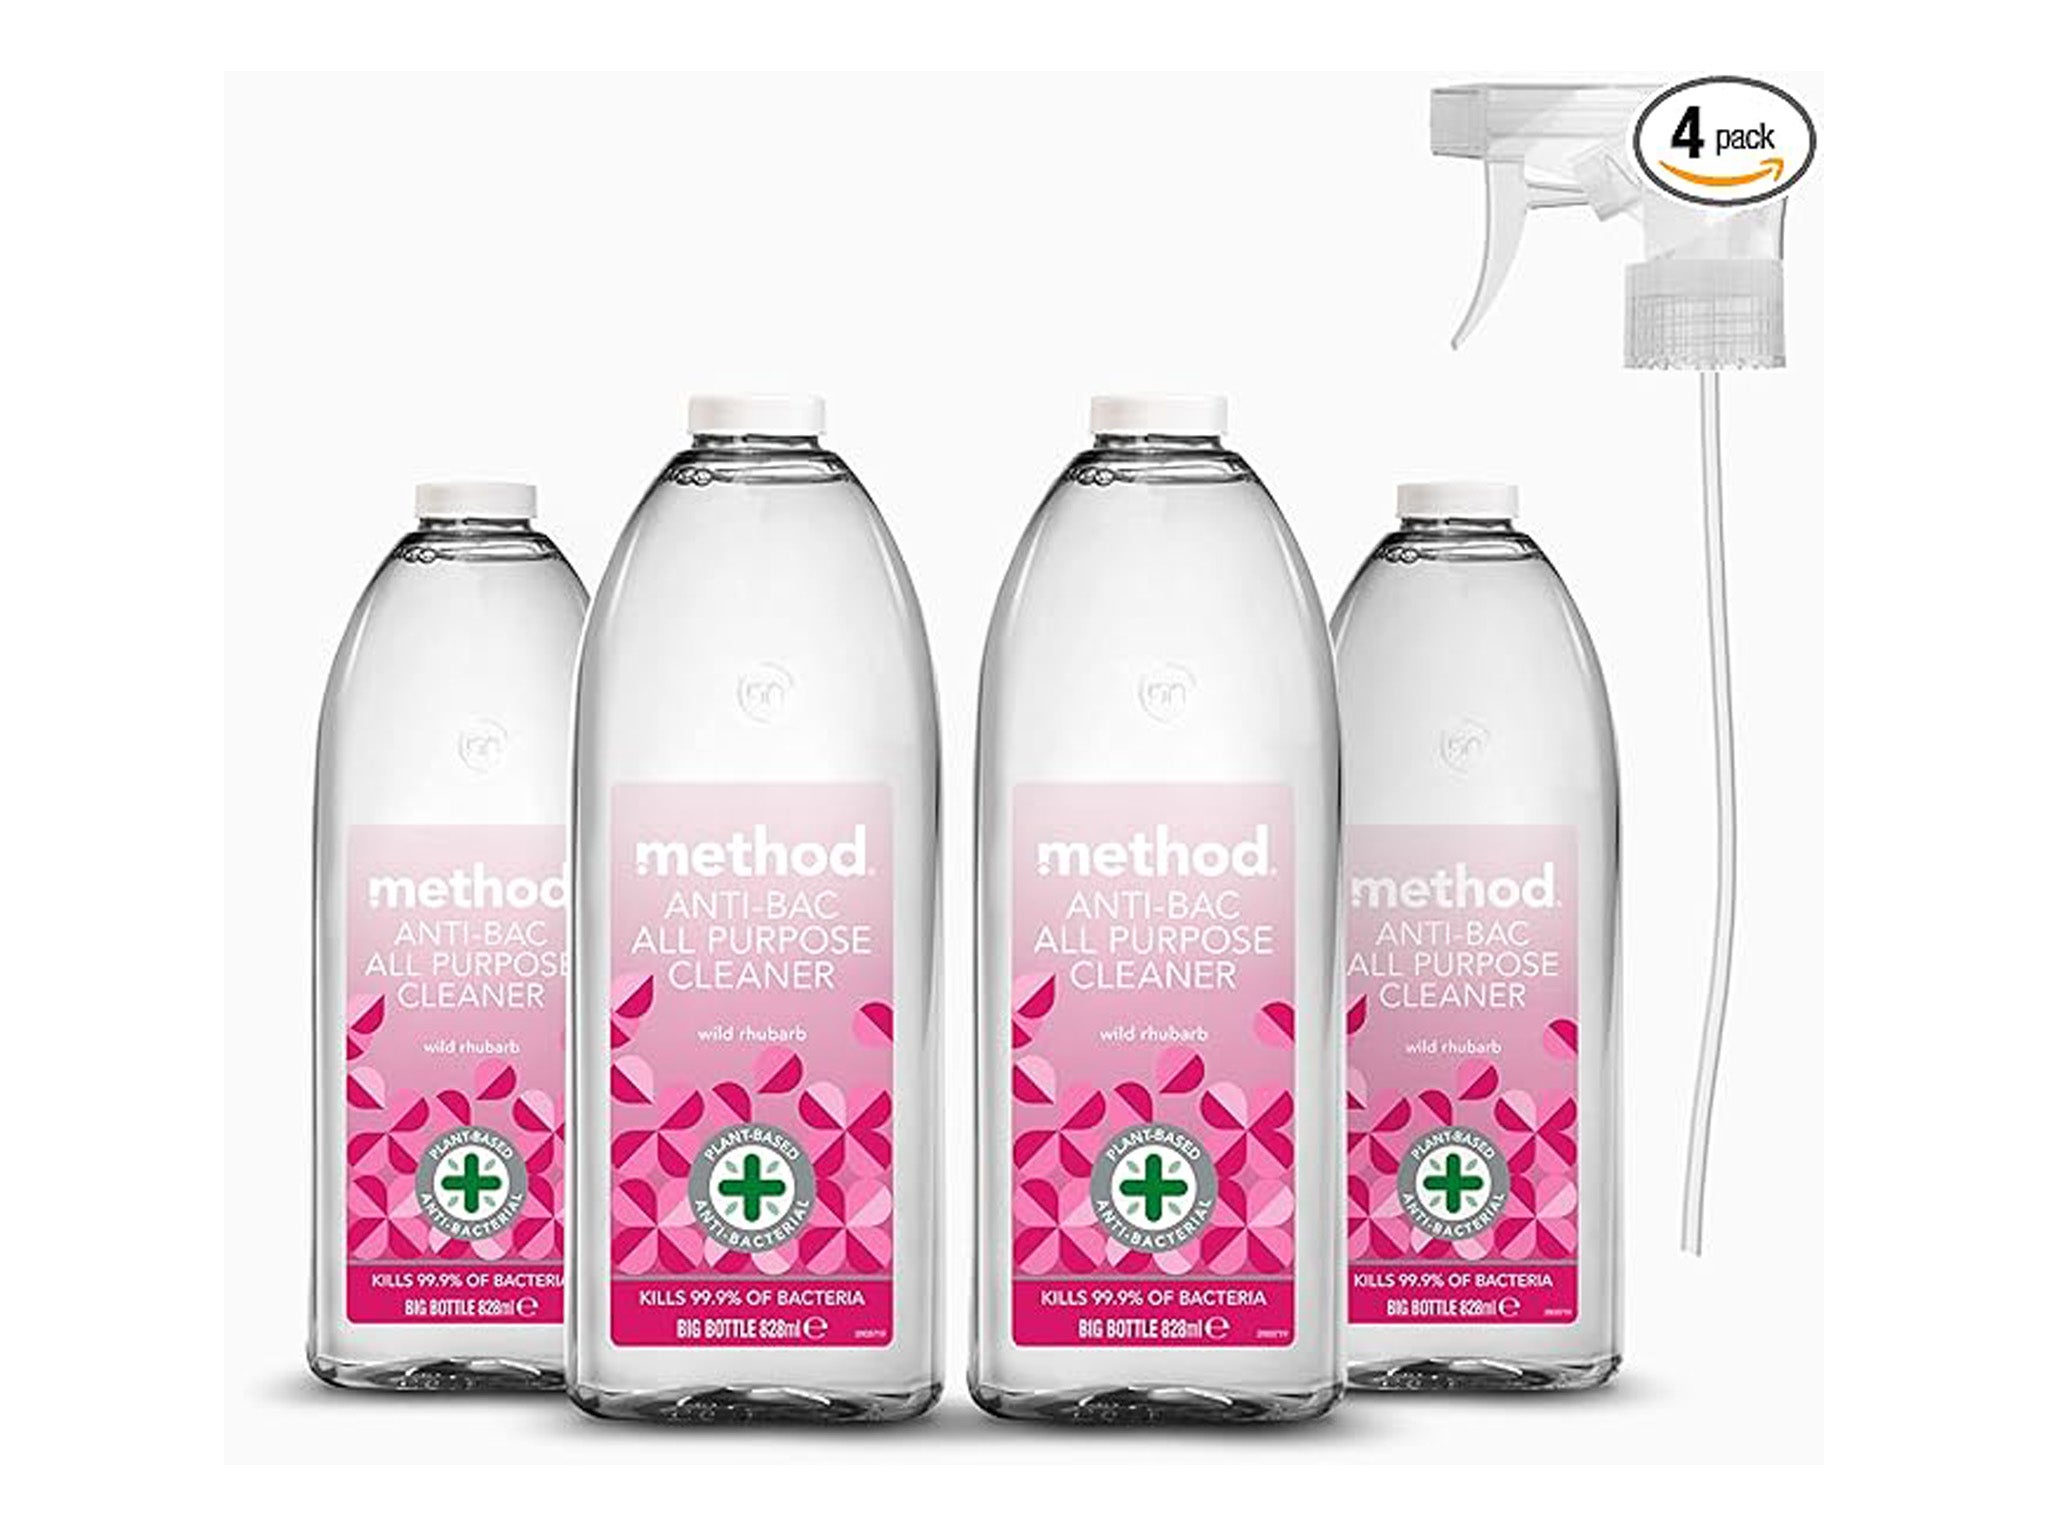 Prime Day deals UK: Best discounts on cleaning products